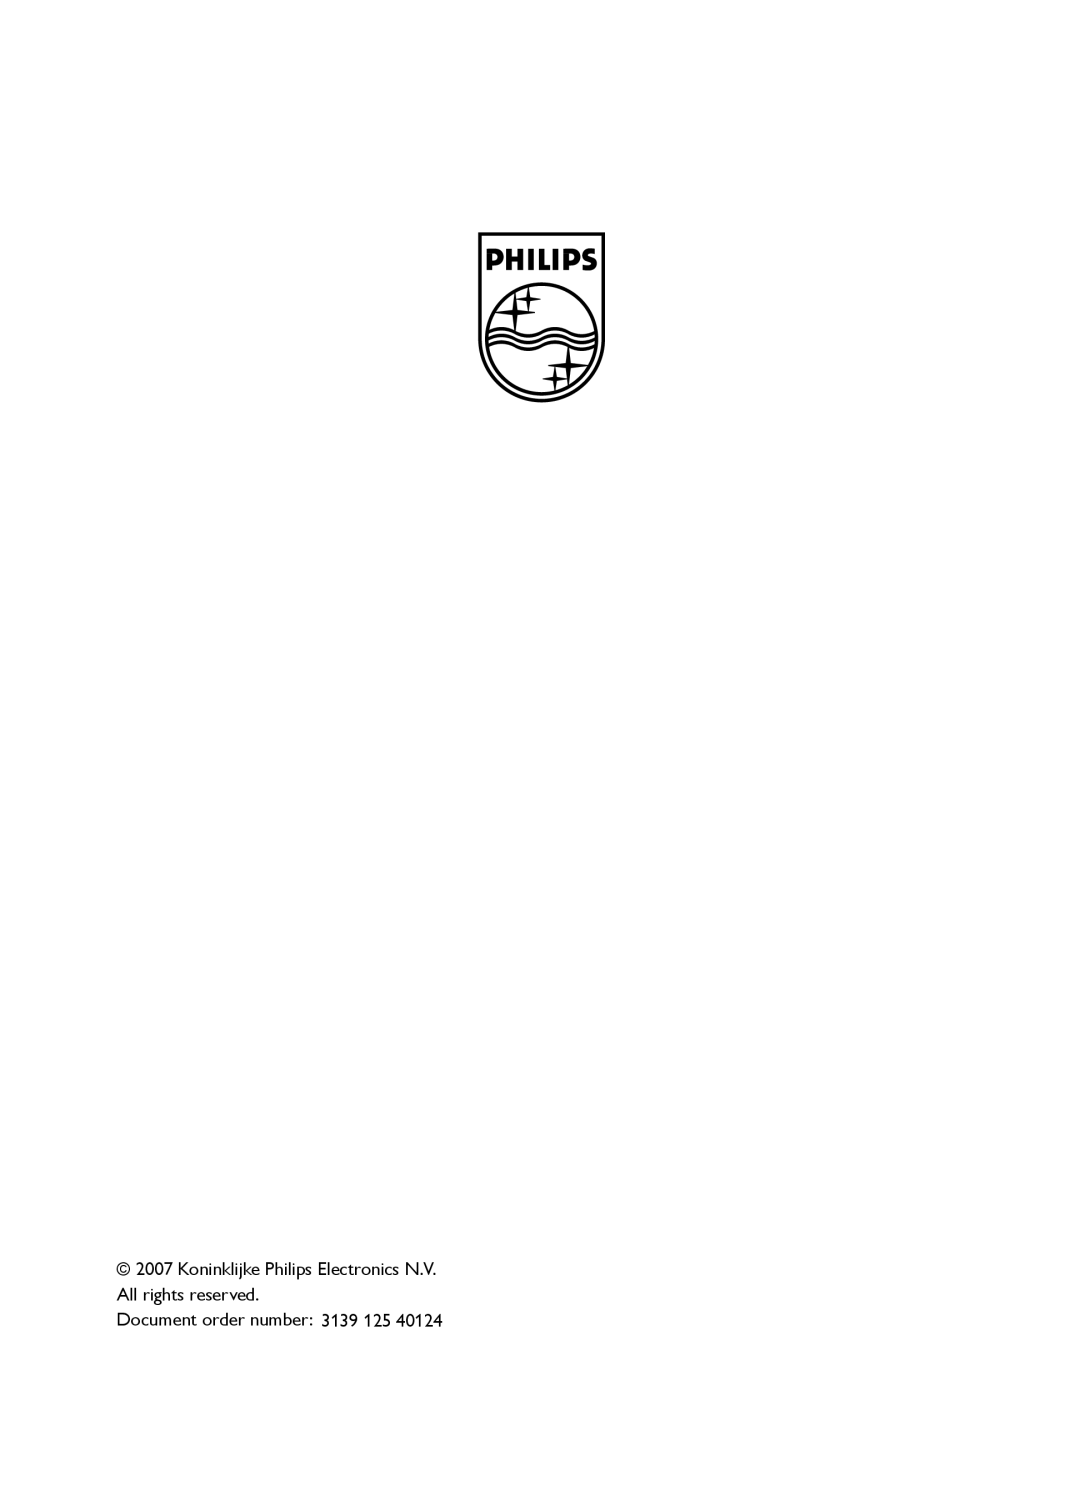 Philips 52PFL7803 user manual Document order number: 3139 125 